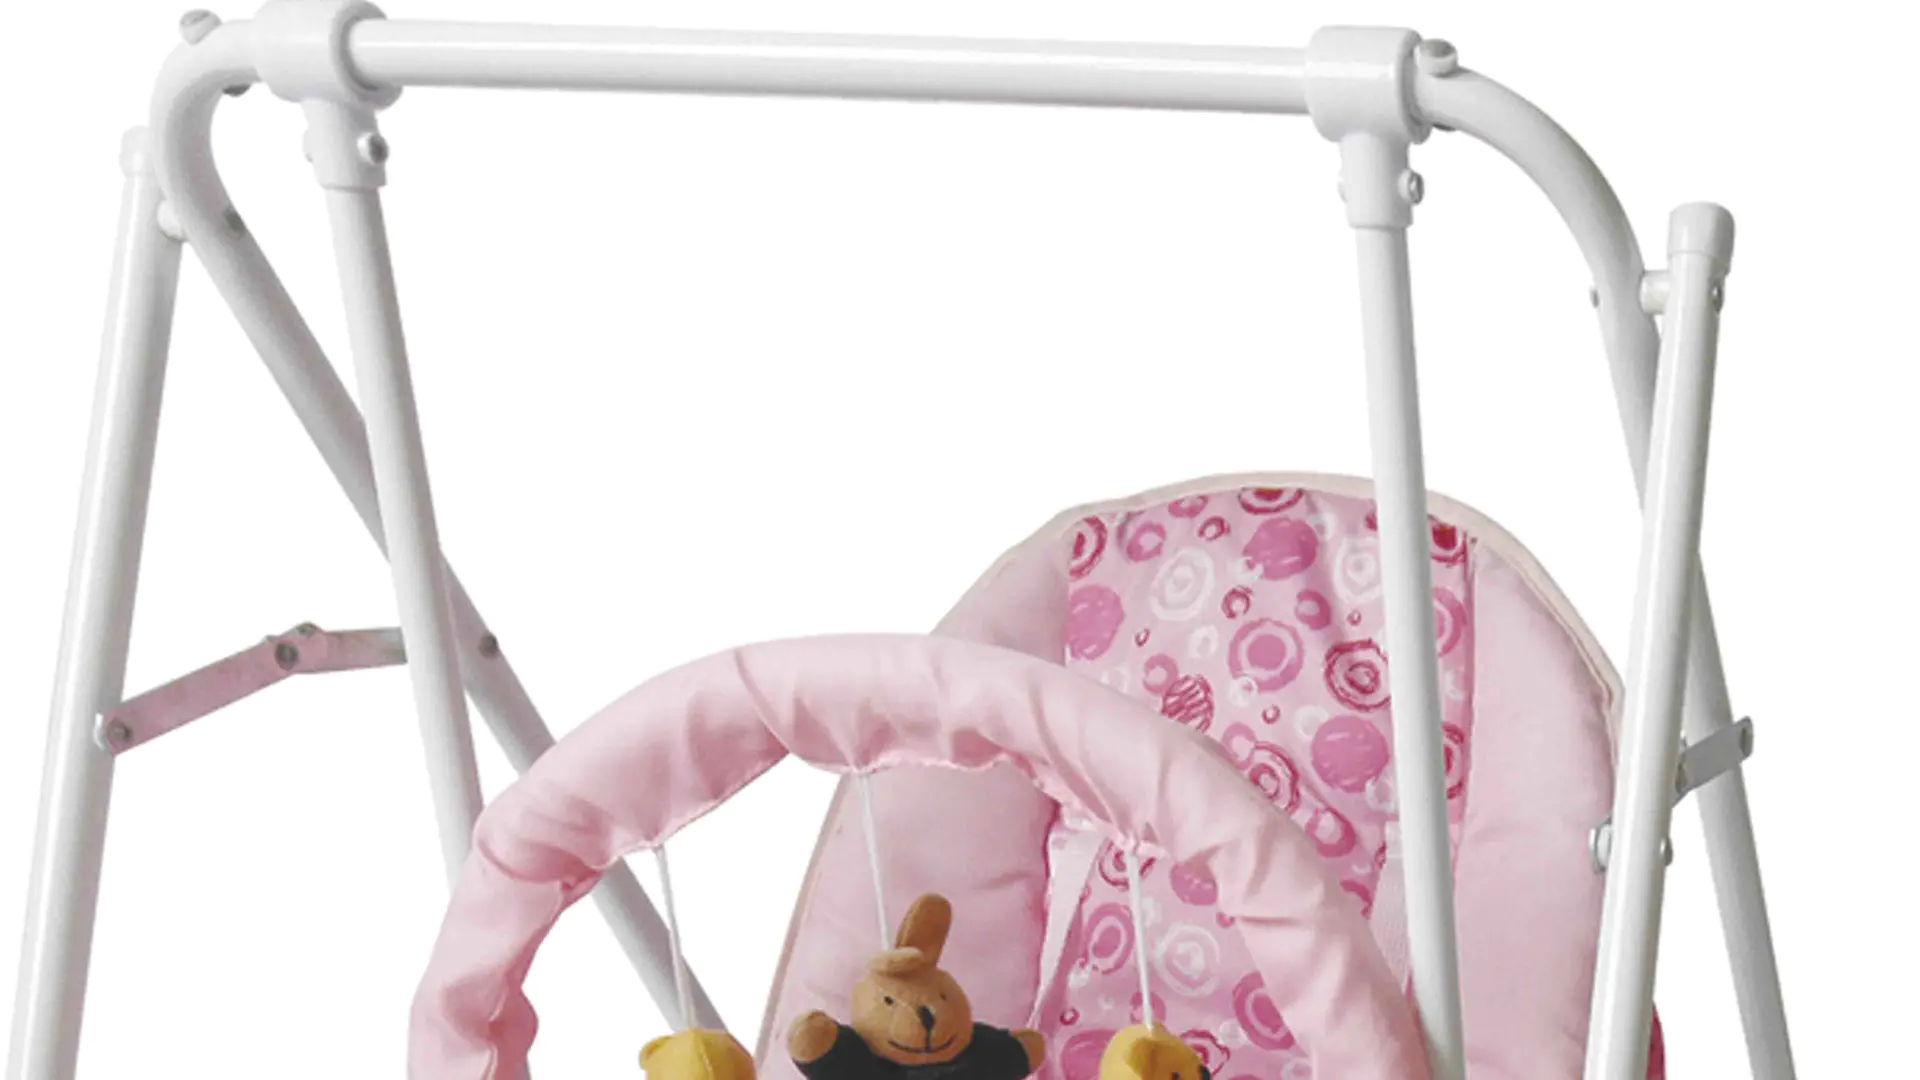 Aoqi babies swing factory for babys room